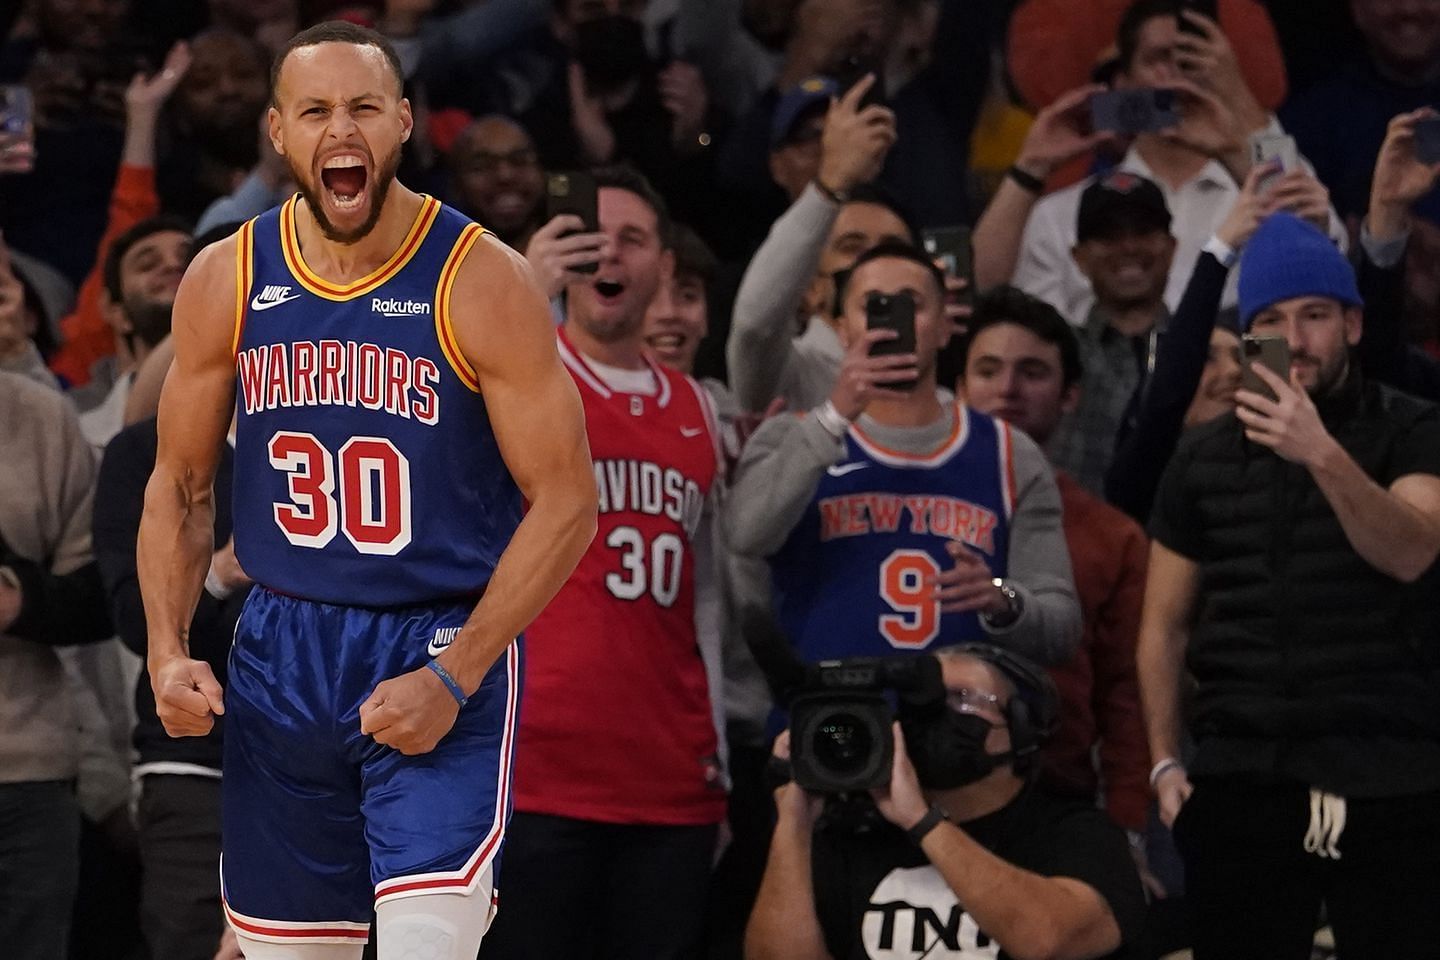 Steph Curry just set the NBA 3-pointer record in front of a raucous Madison Square Garden crowd. [Photo: The Boston Globe]